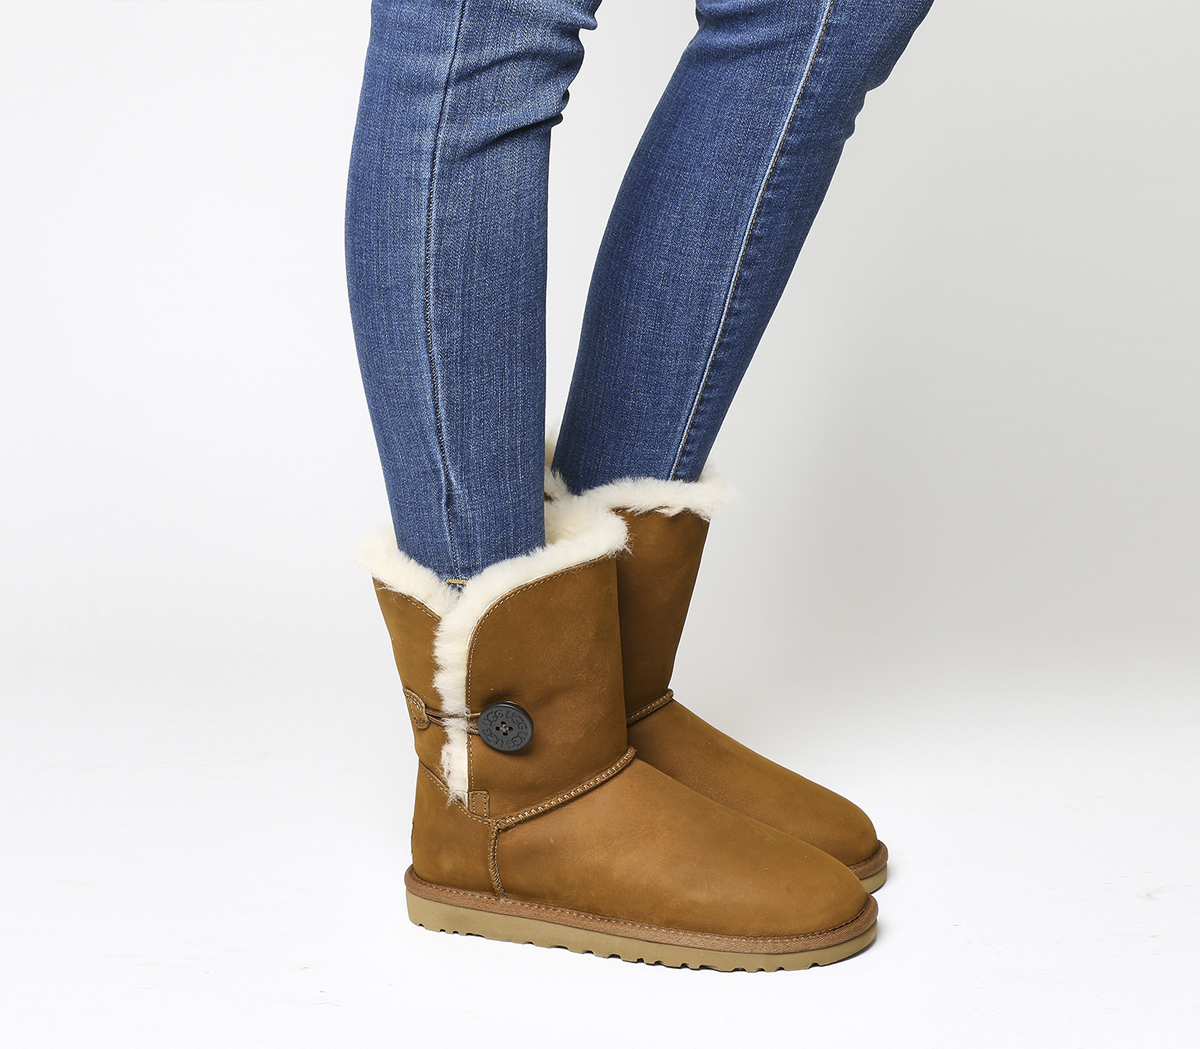 chestnut leather ugg boots